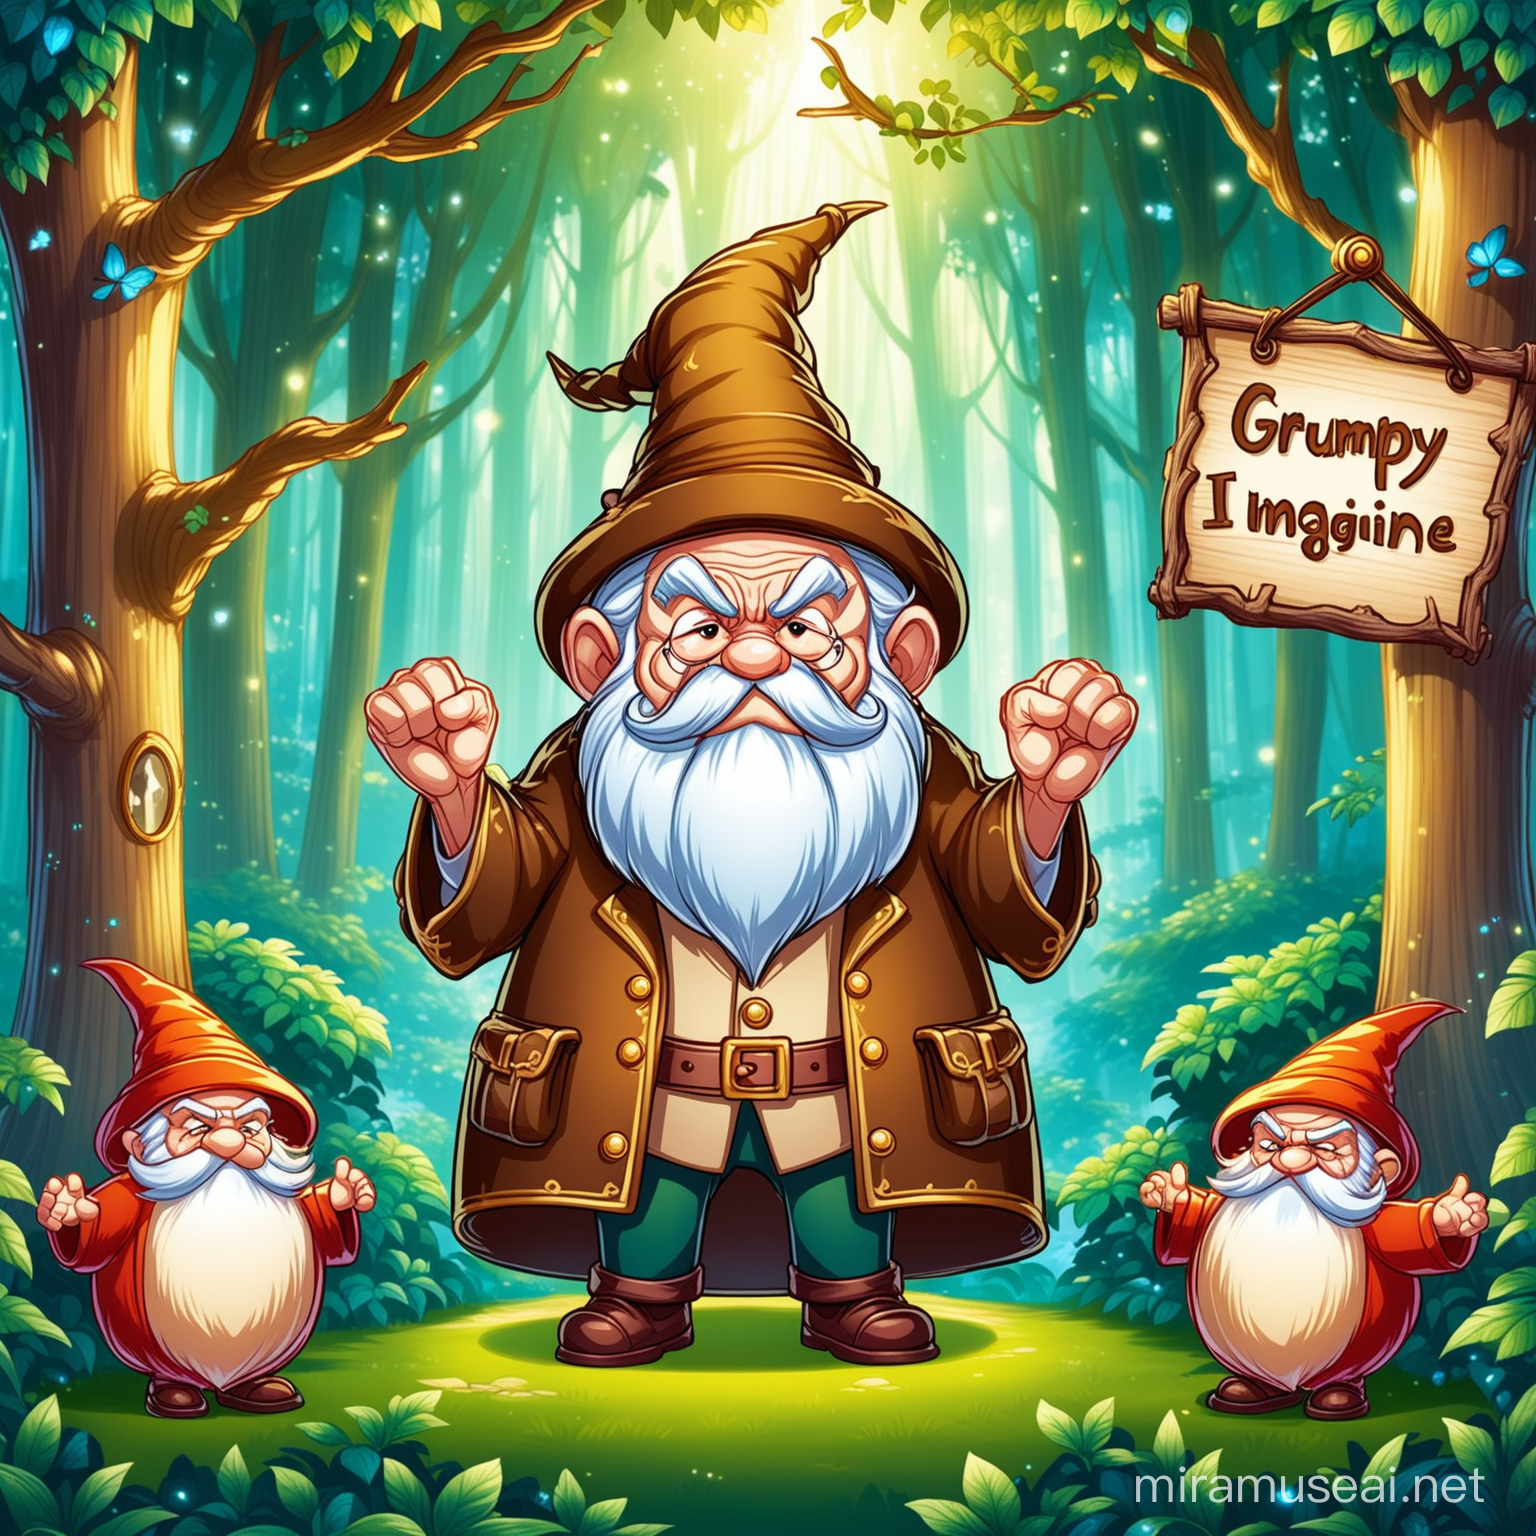 Enchanted Forest Cartoon Grumpy Old Man in Poseable Prompts